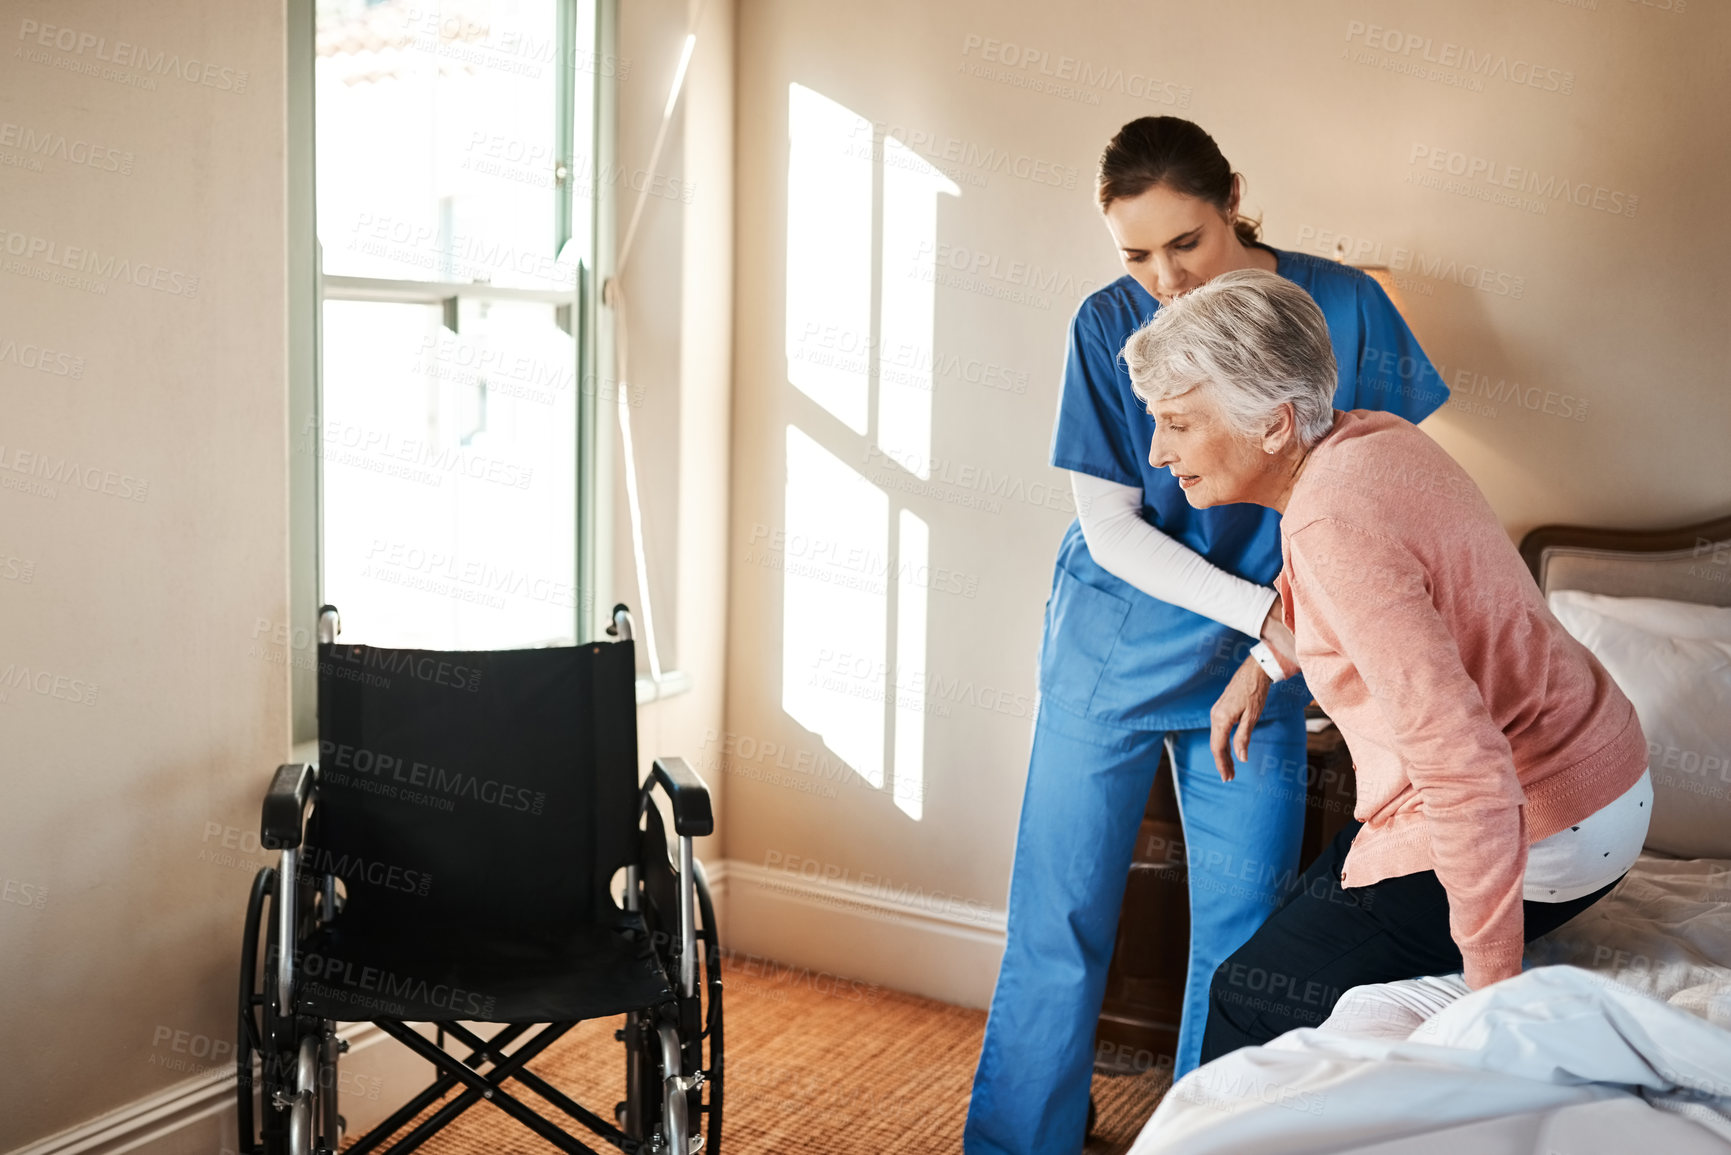 Buy stock photo Shot of a young nurse helping a senior woman get up from her bed in a nursing home